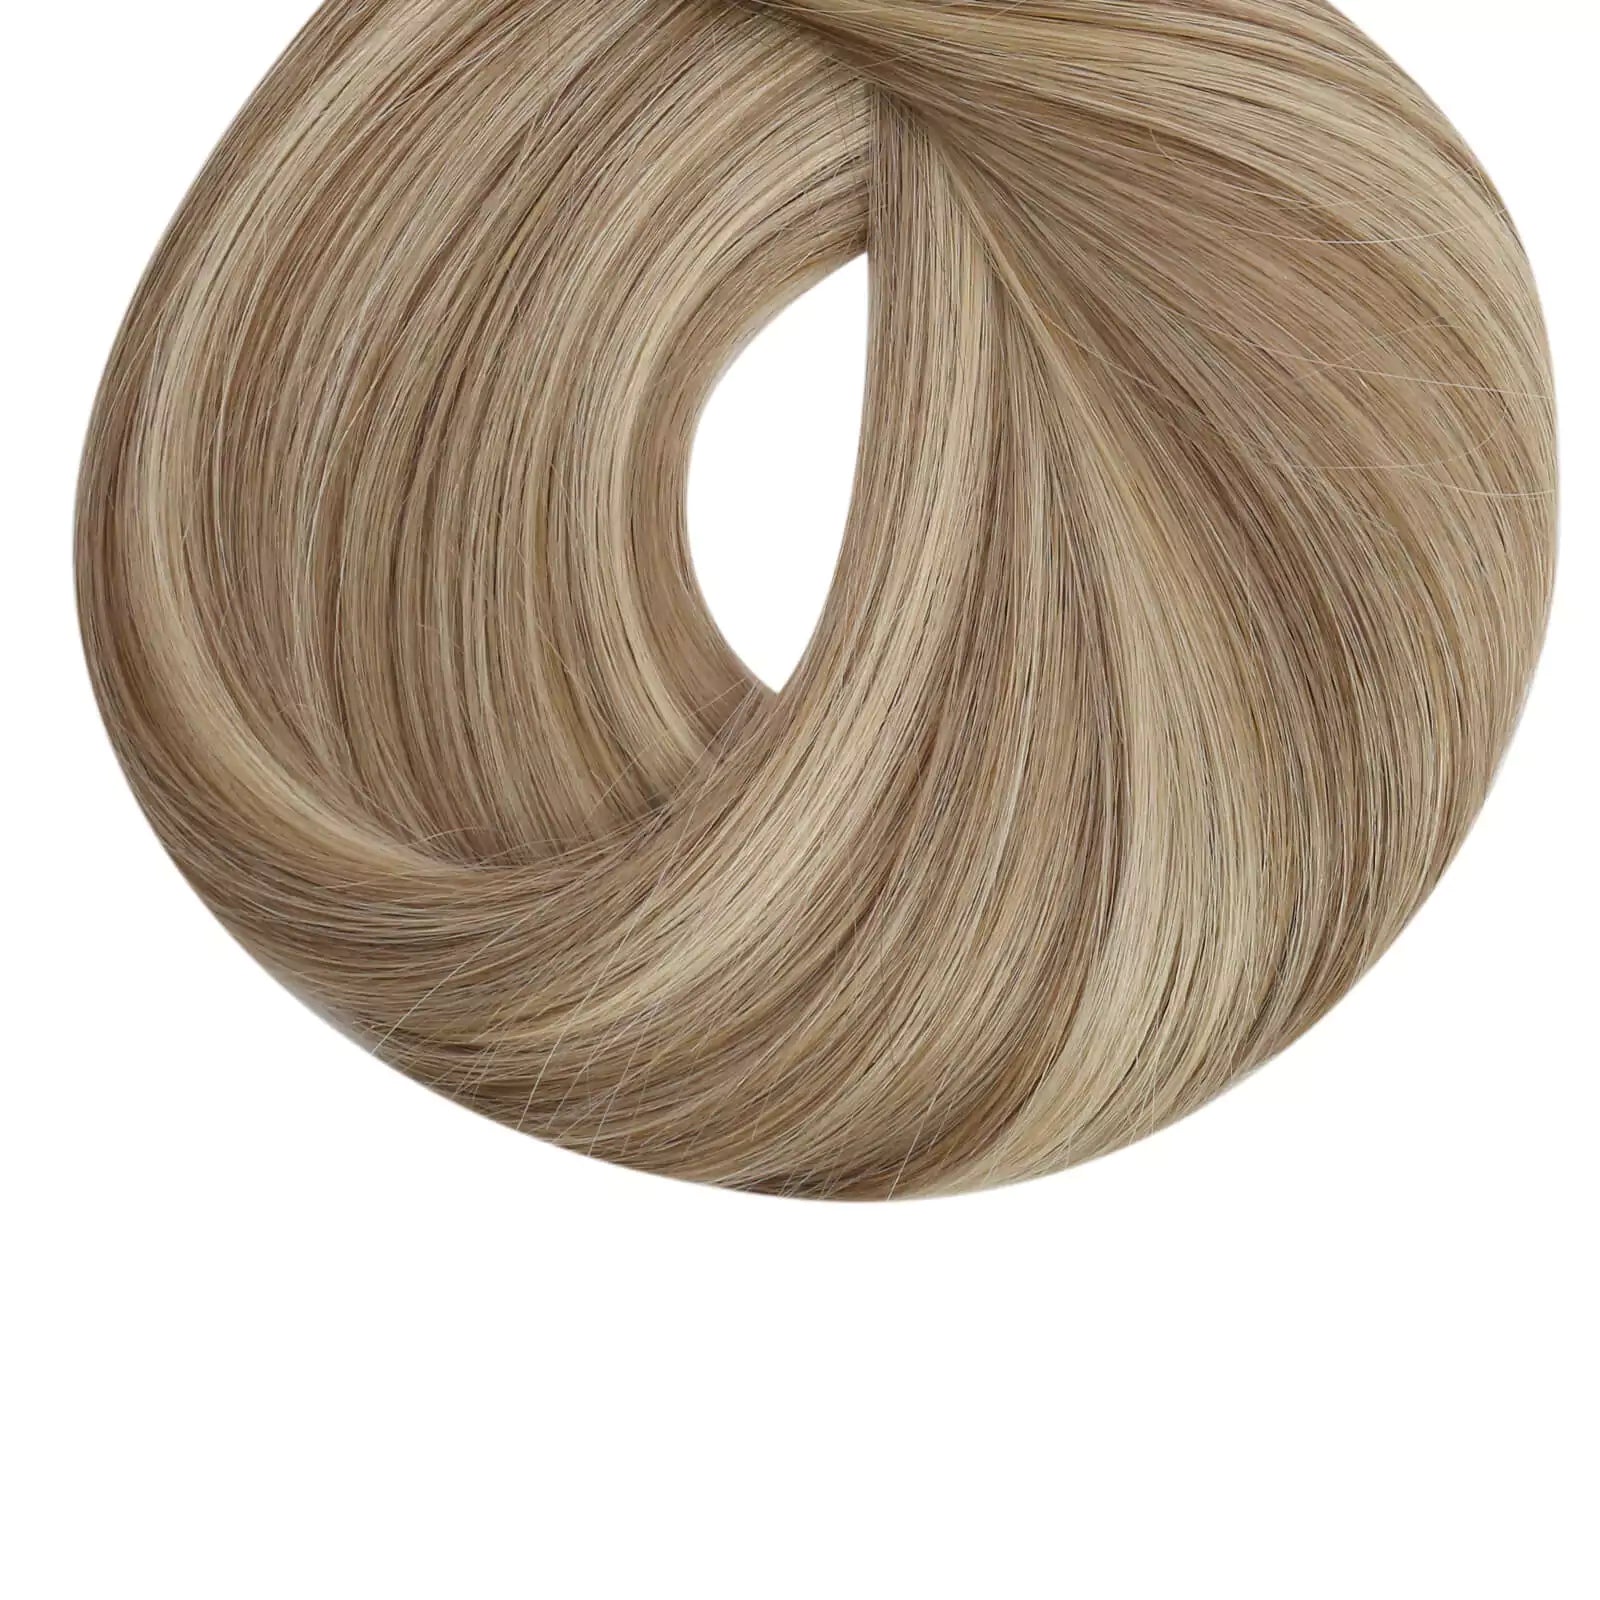 Clip in hair extension beautiful color 3/8/22